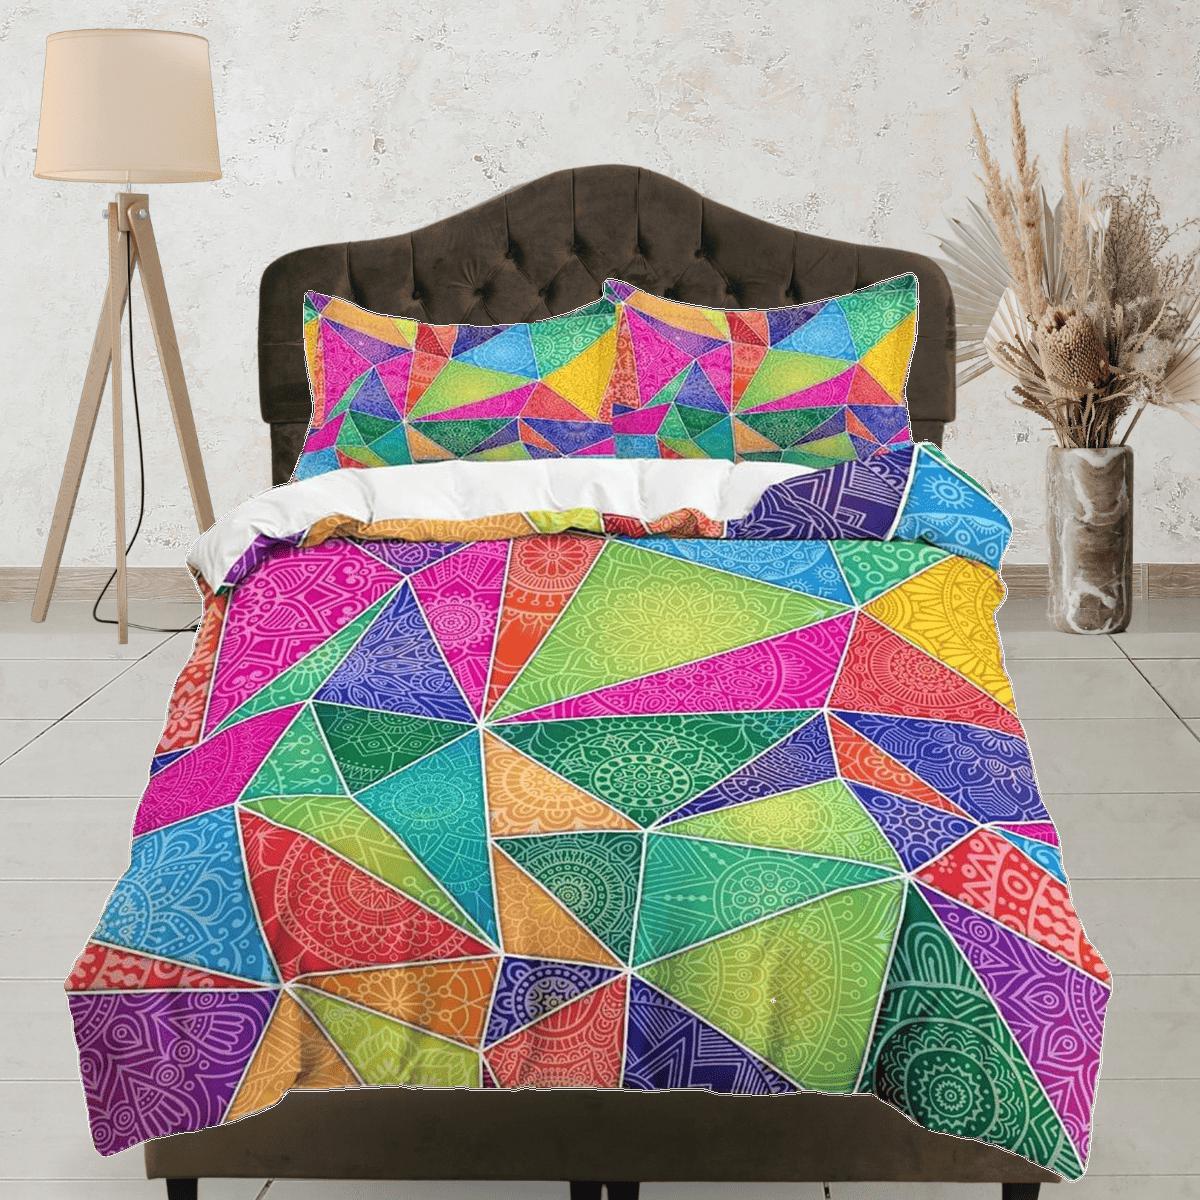 daintyduvet Colorful geometric patchwork quilt printed duvet cover, aesthetic room decor bedding set full, king, queen size, boho bedspread shabby chic